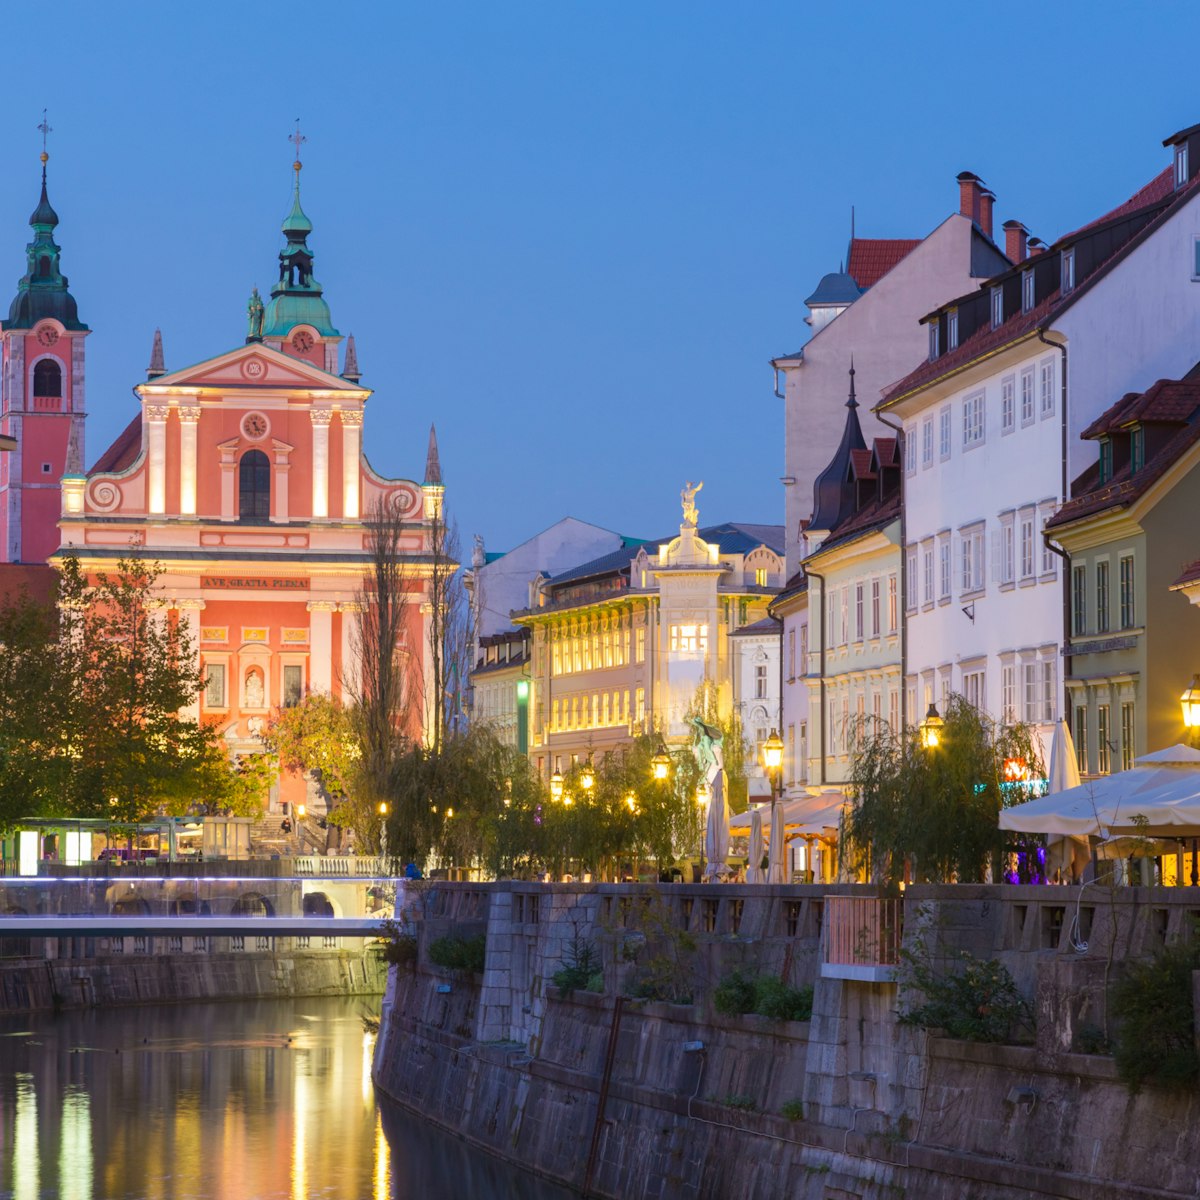 500px Photo ID: 144389993 - Romantic medieval Ljubljana's city center, capital of Slovenia, Europe. Night life on the banks of river Ljubljanica where many bars and restaurants take place. Franciscan Church in background